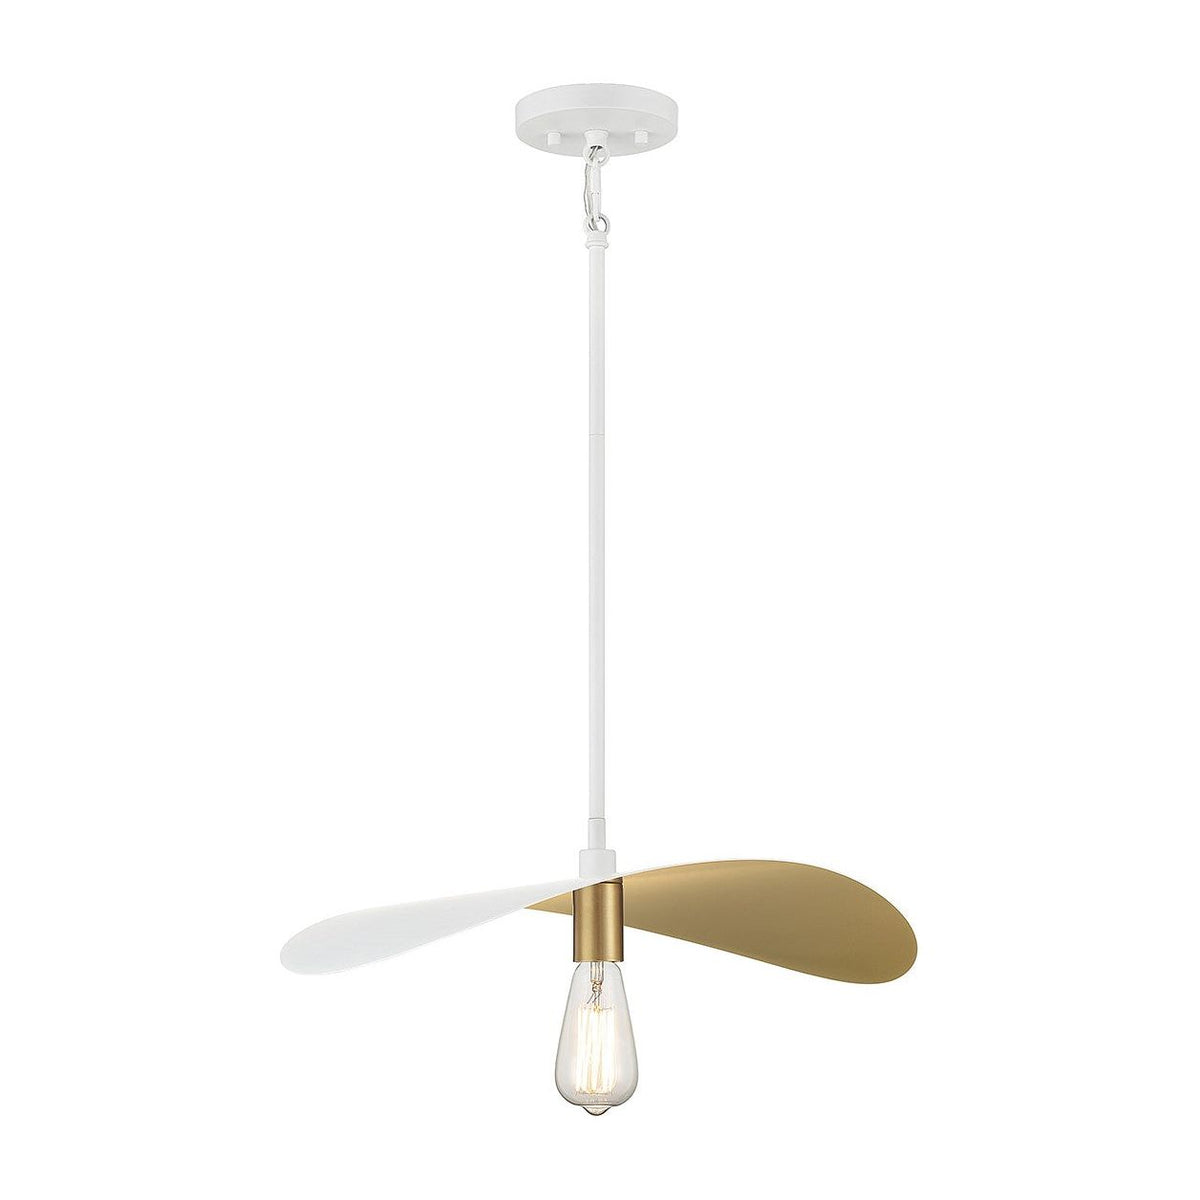 Meridian - M7031WHNB - One Light Pendant - White and Painted Gold